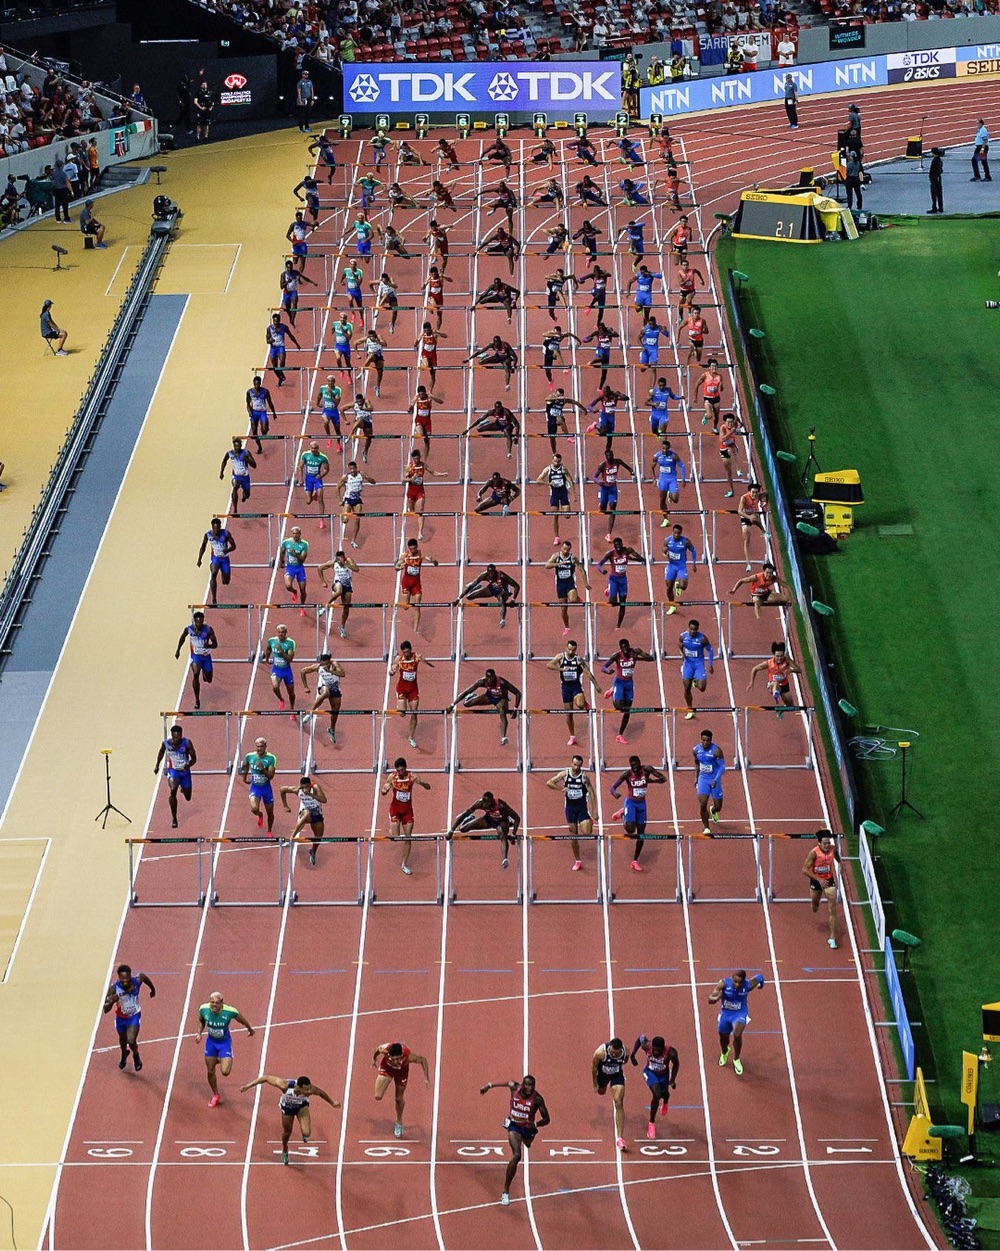 a composite image of a 110-meter hurdles race at the 2023 world championships